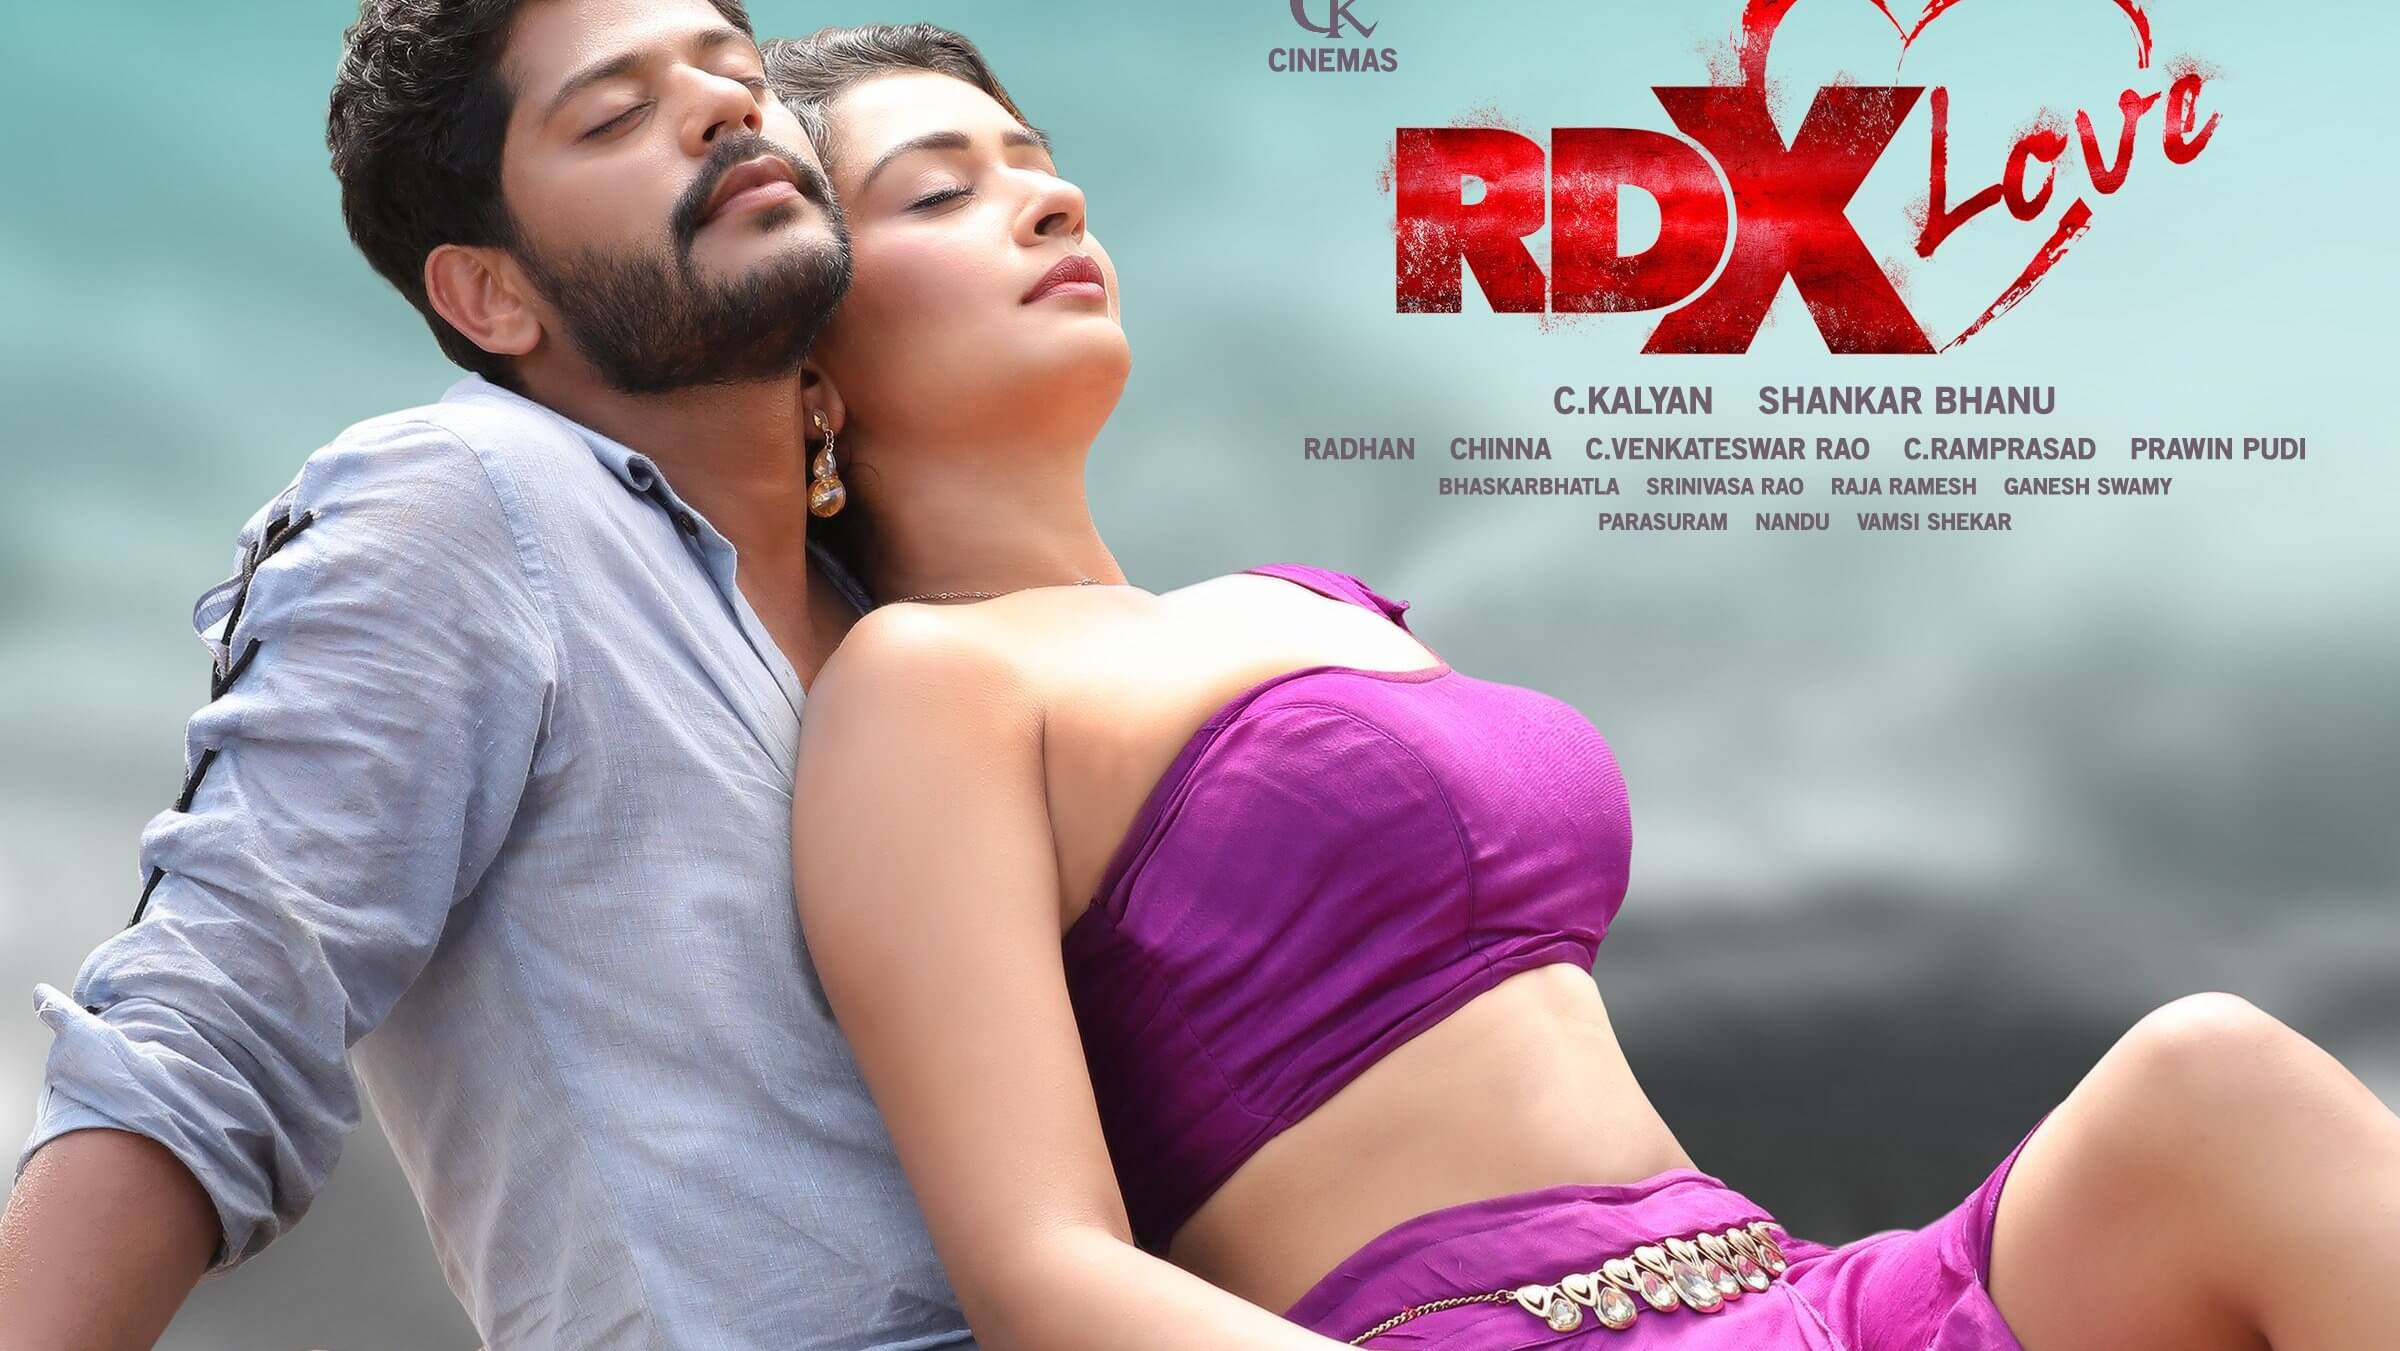 RDX Love Movie Reviews and Ratings